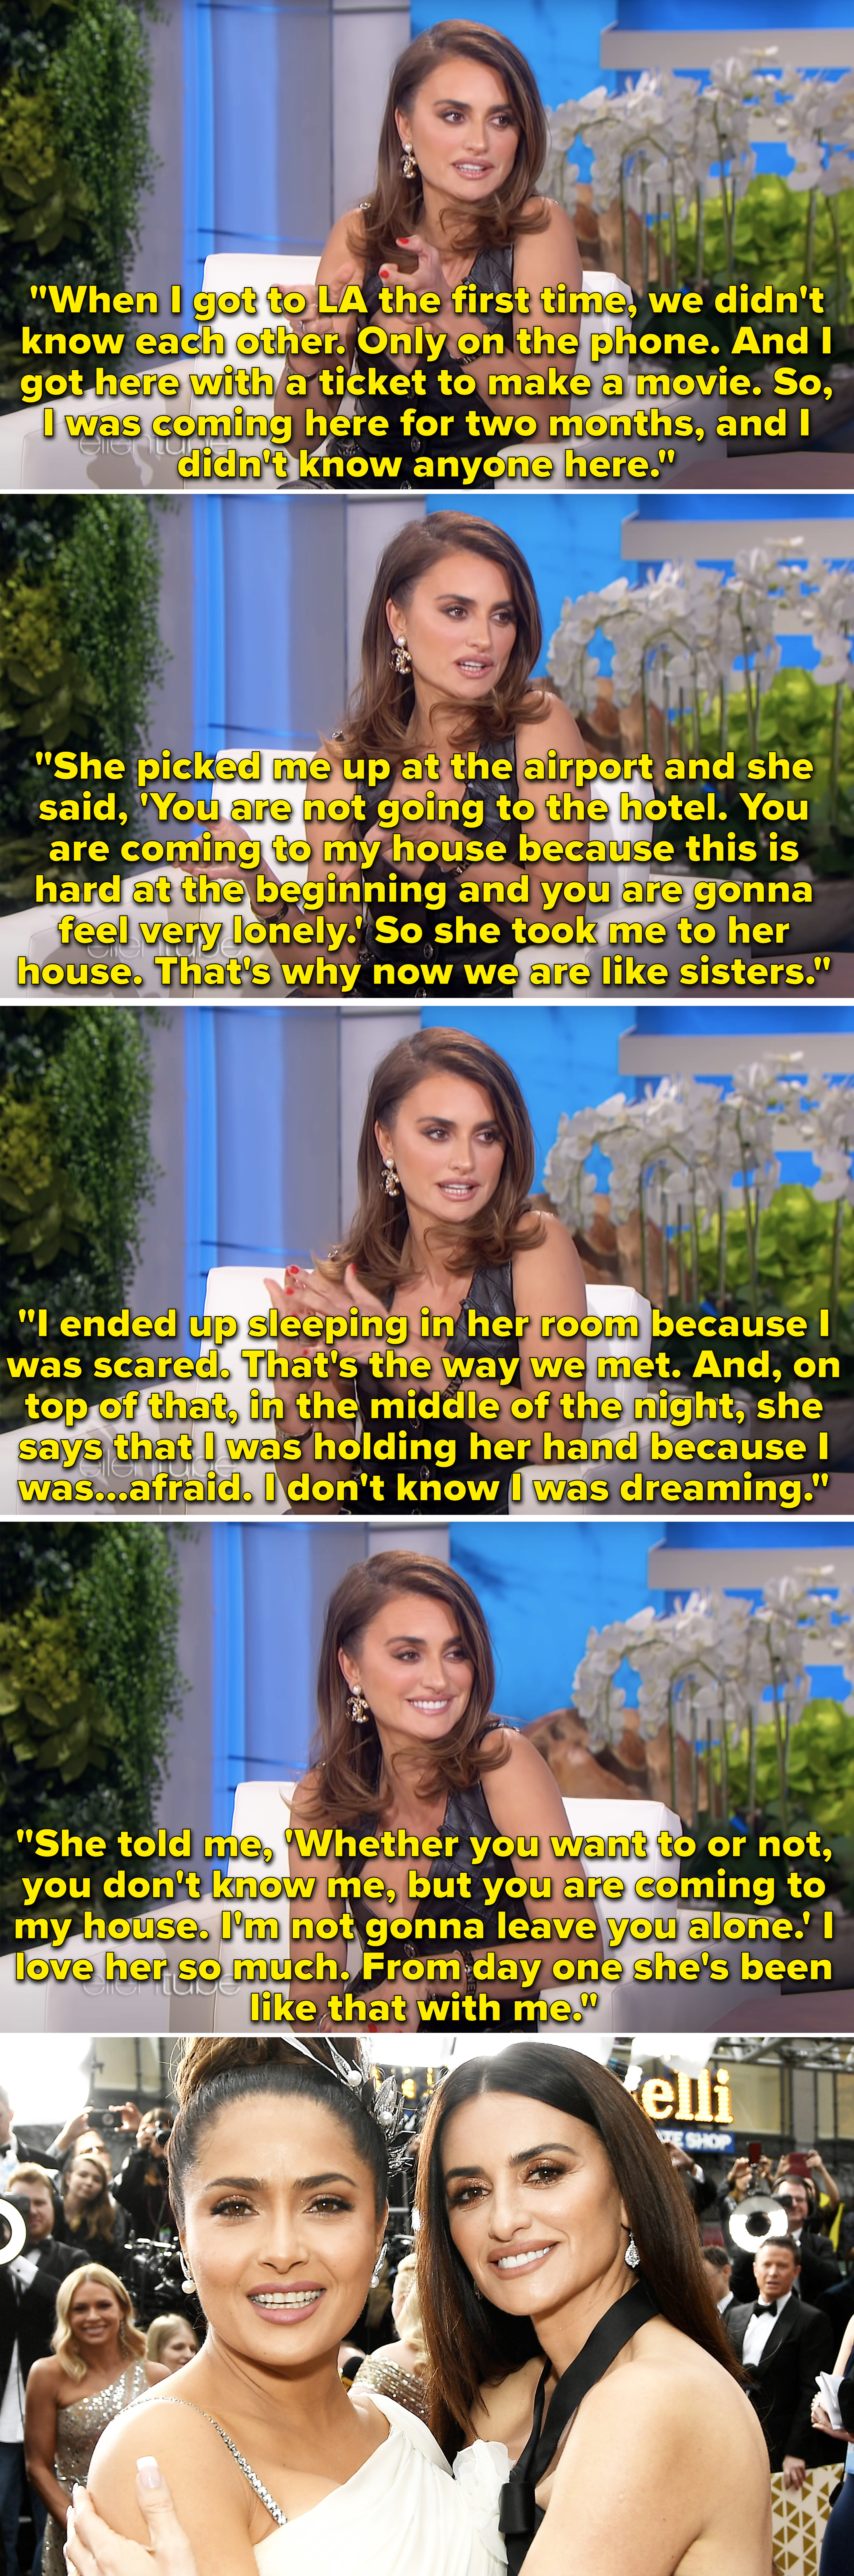 Penelope Cruz saying that Salma Hayek had her stay with her when she first got to LA and a picture of them at an event hugging